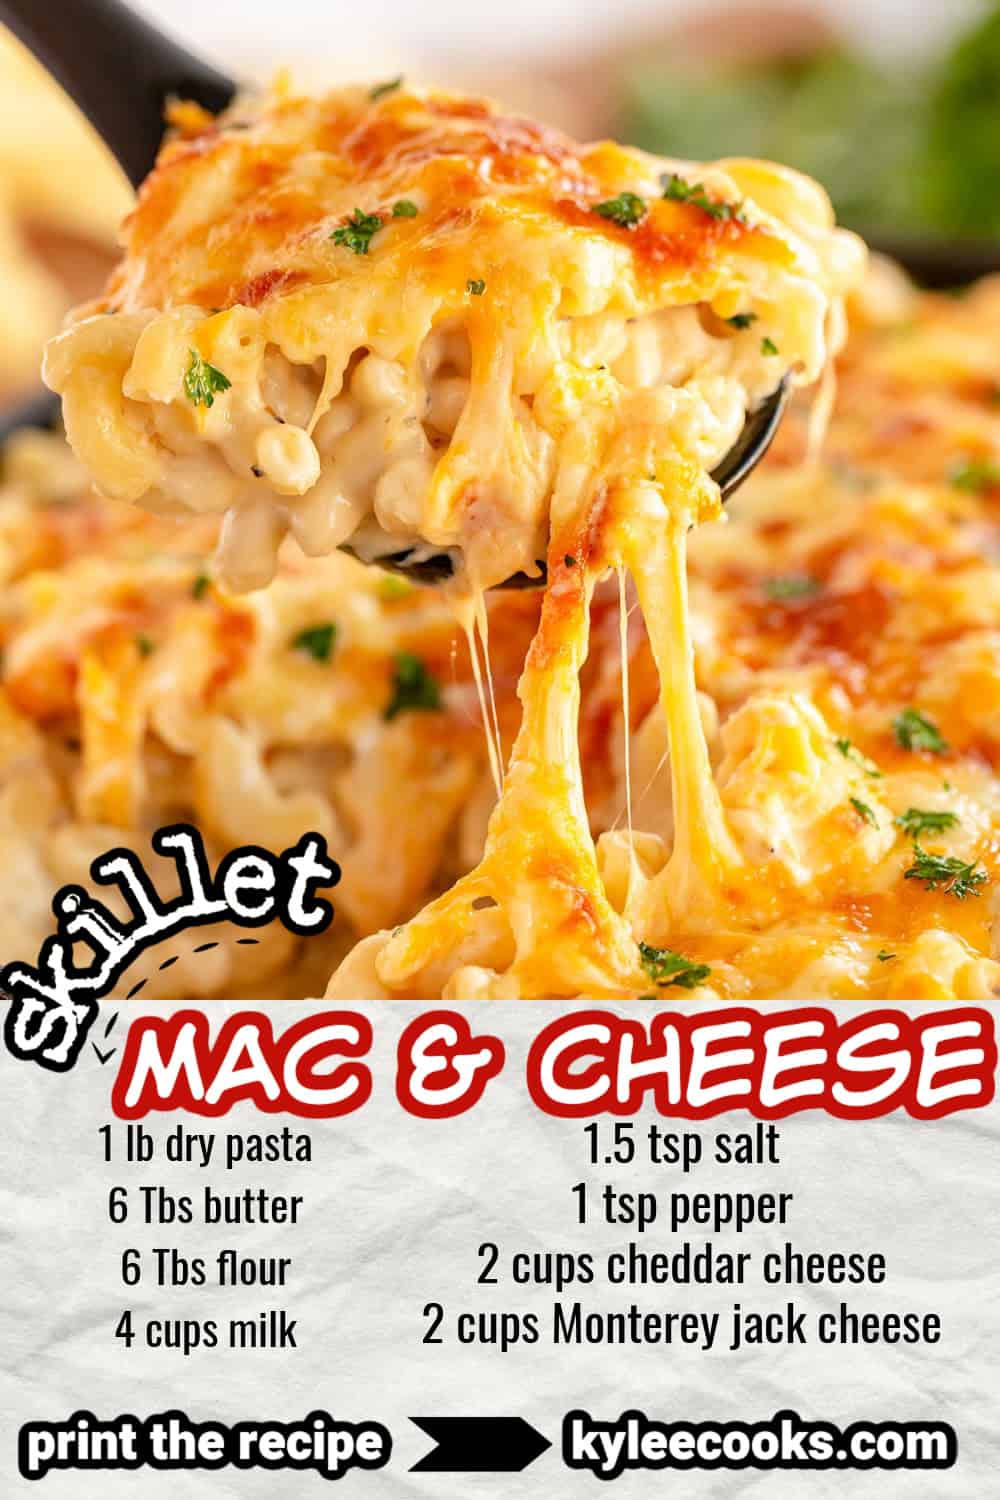 skillet mac and cheese with recipe name and ingredients overlaid in text